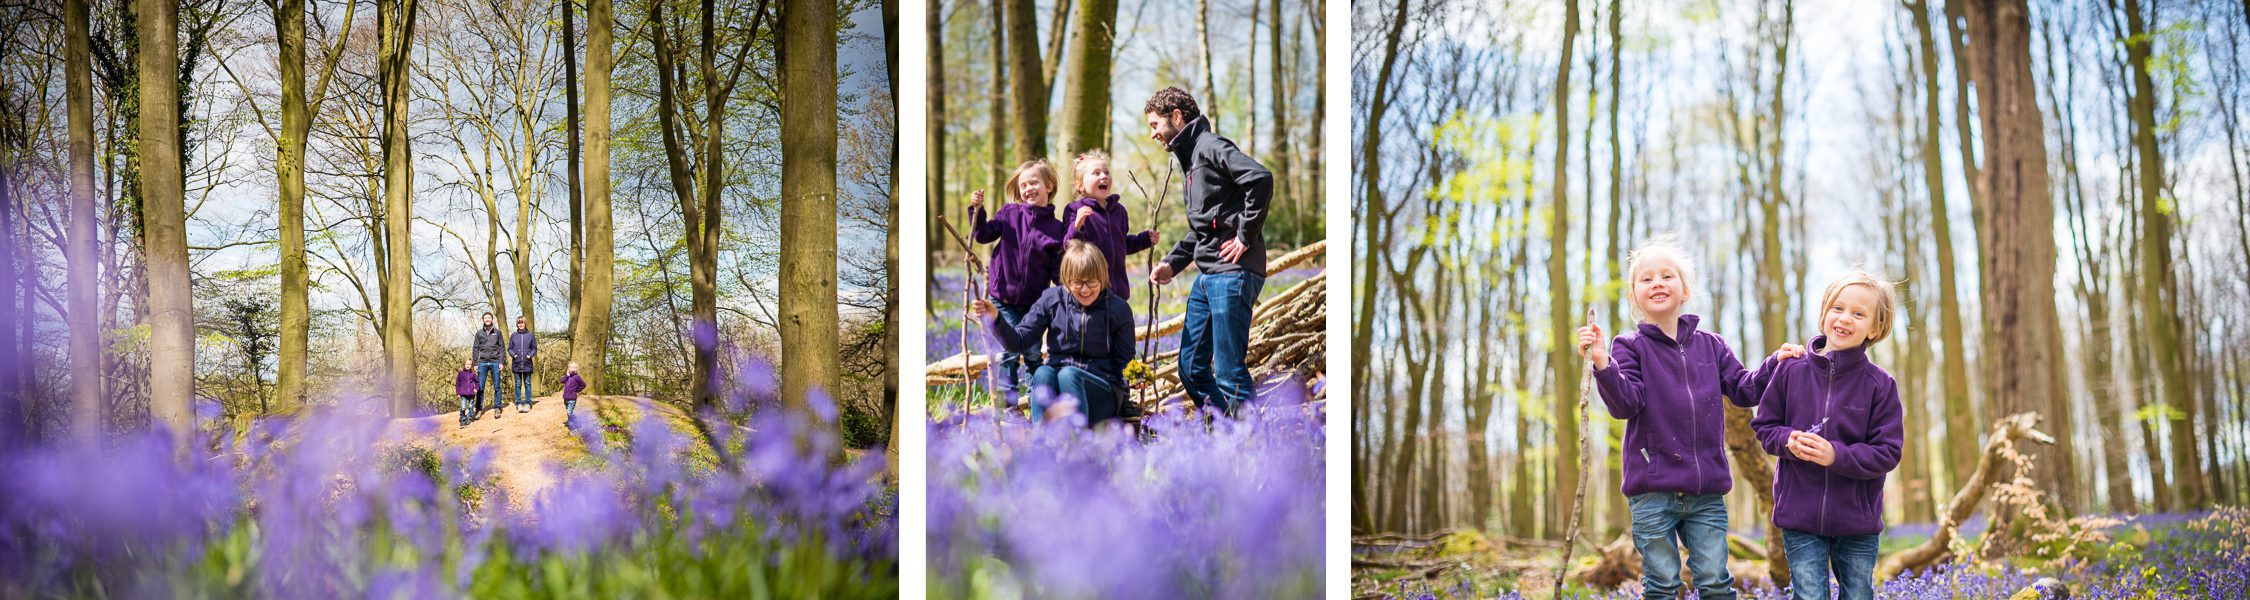 Family portraits with Bluebells in micheldever Woods